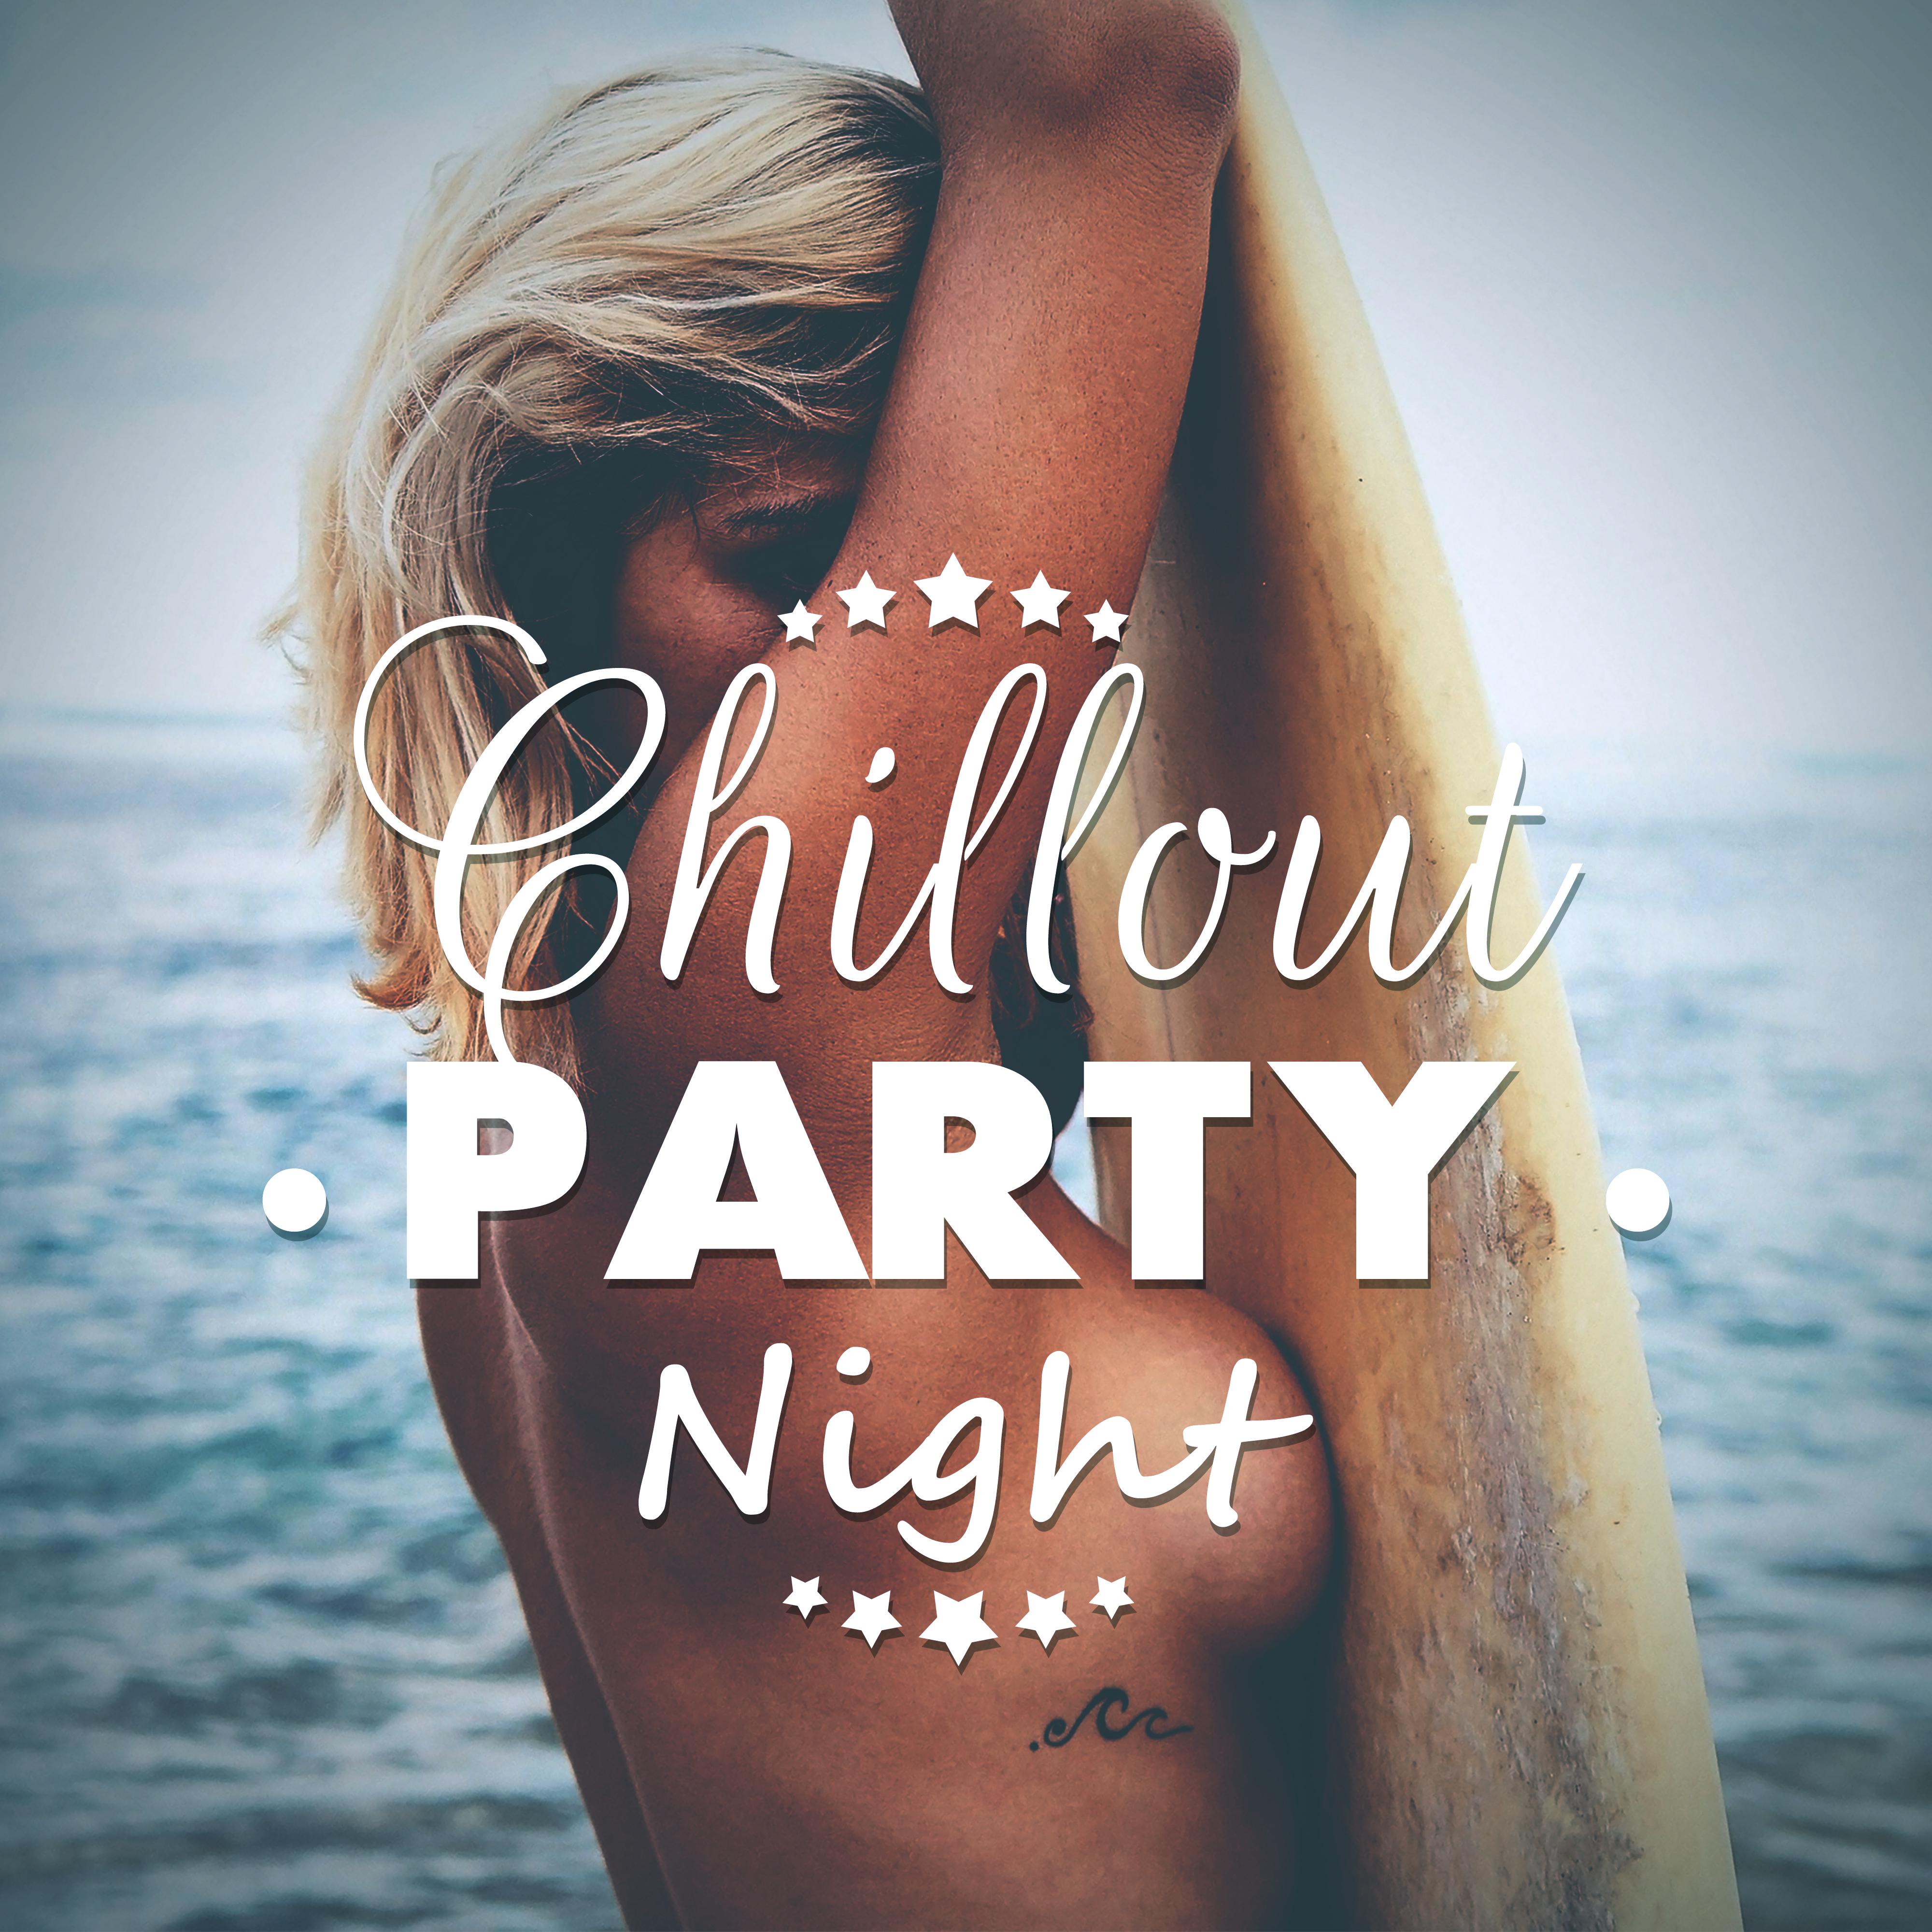 Chillout Party Night – Chillout Music, Electronic Bounce, Dance Party, Chillout Lounge, Chill Out After Party